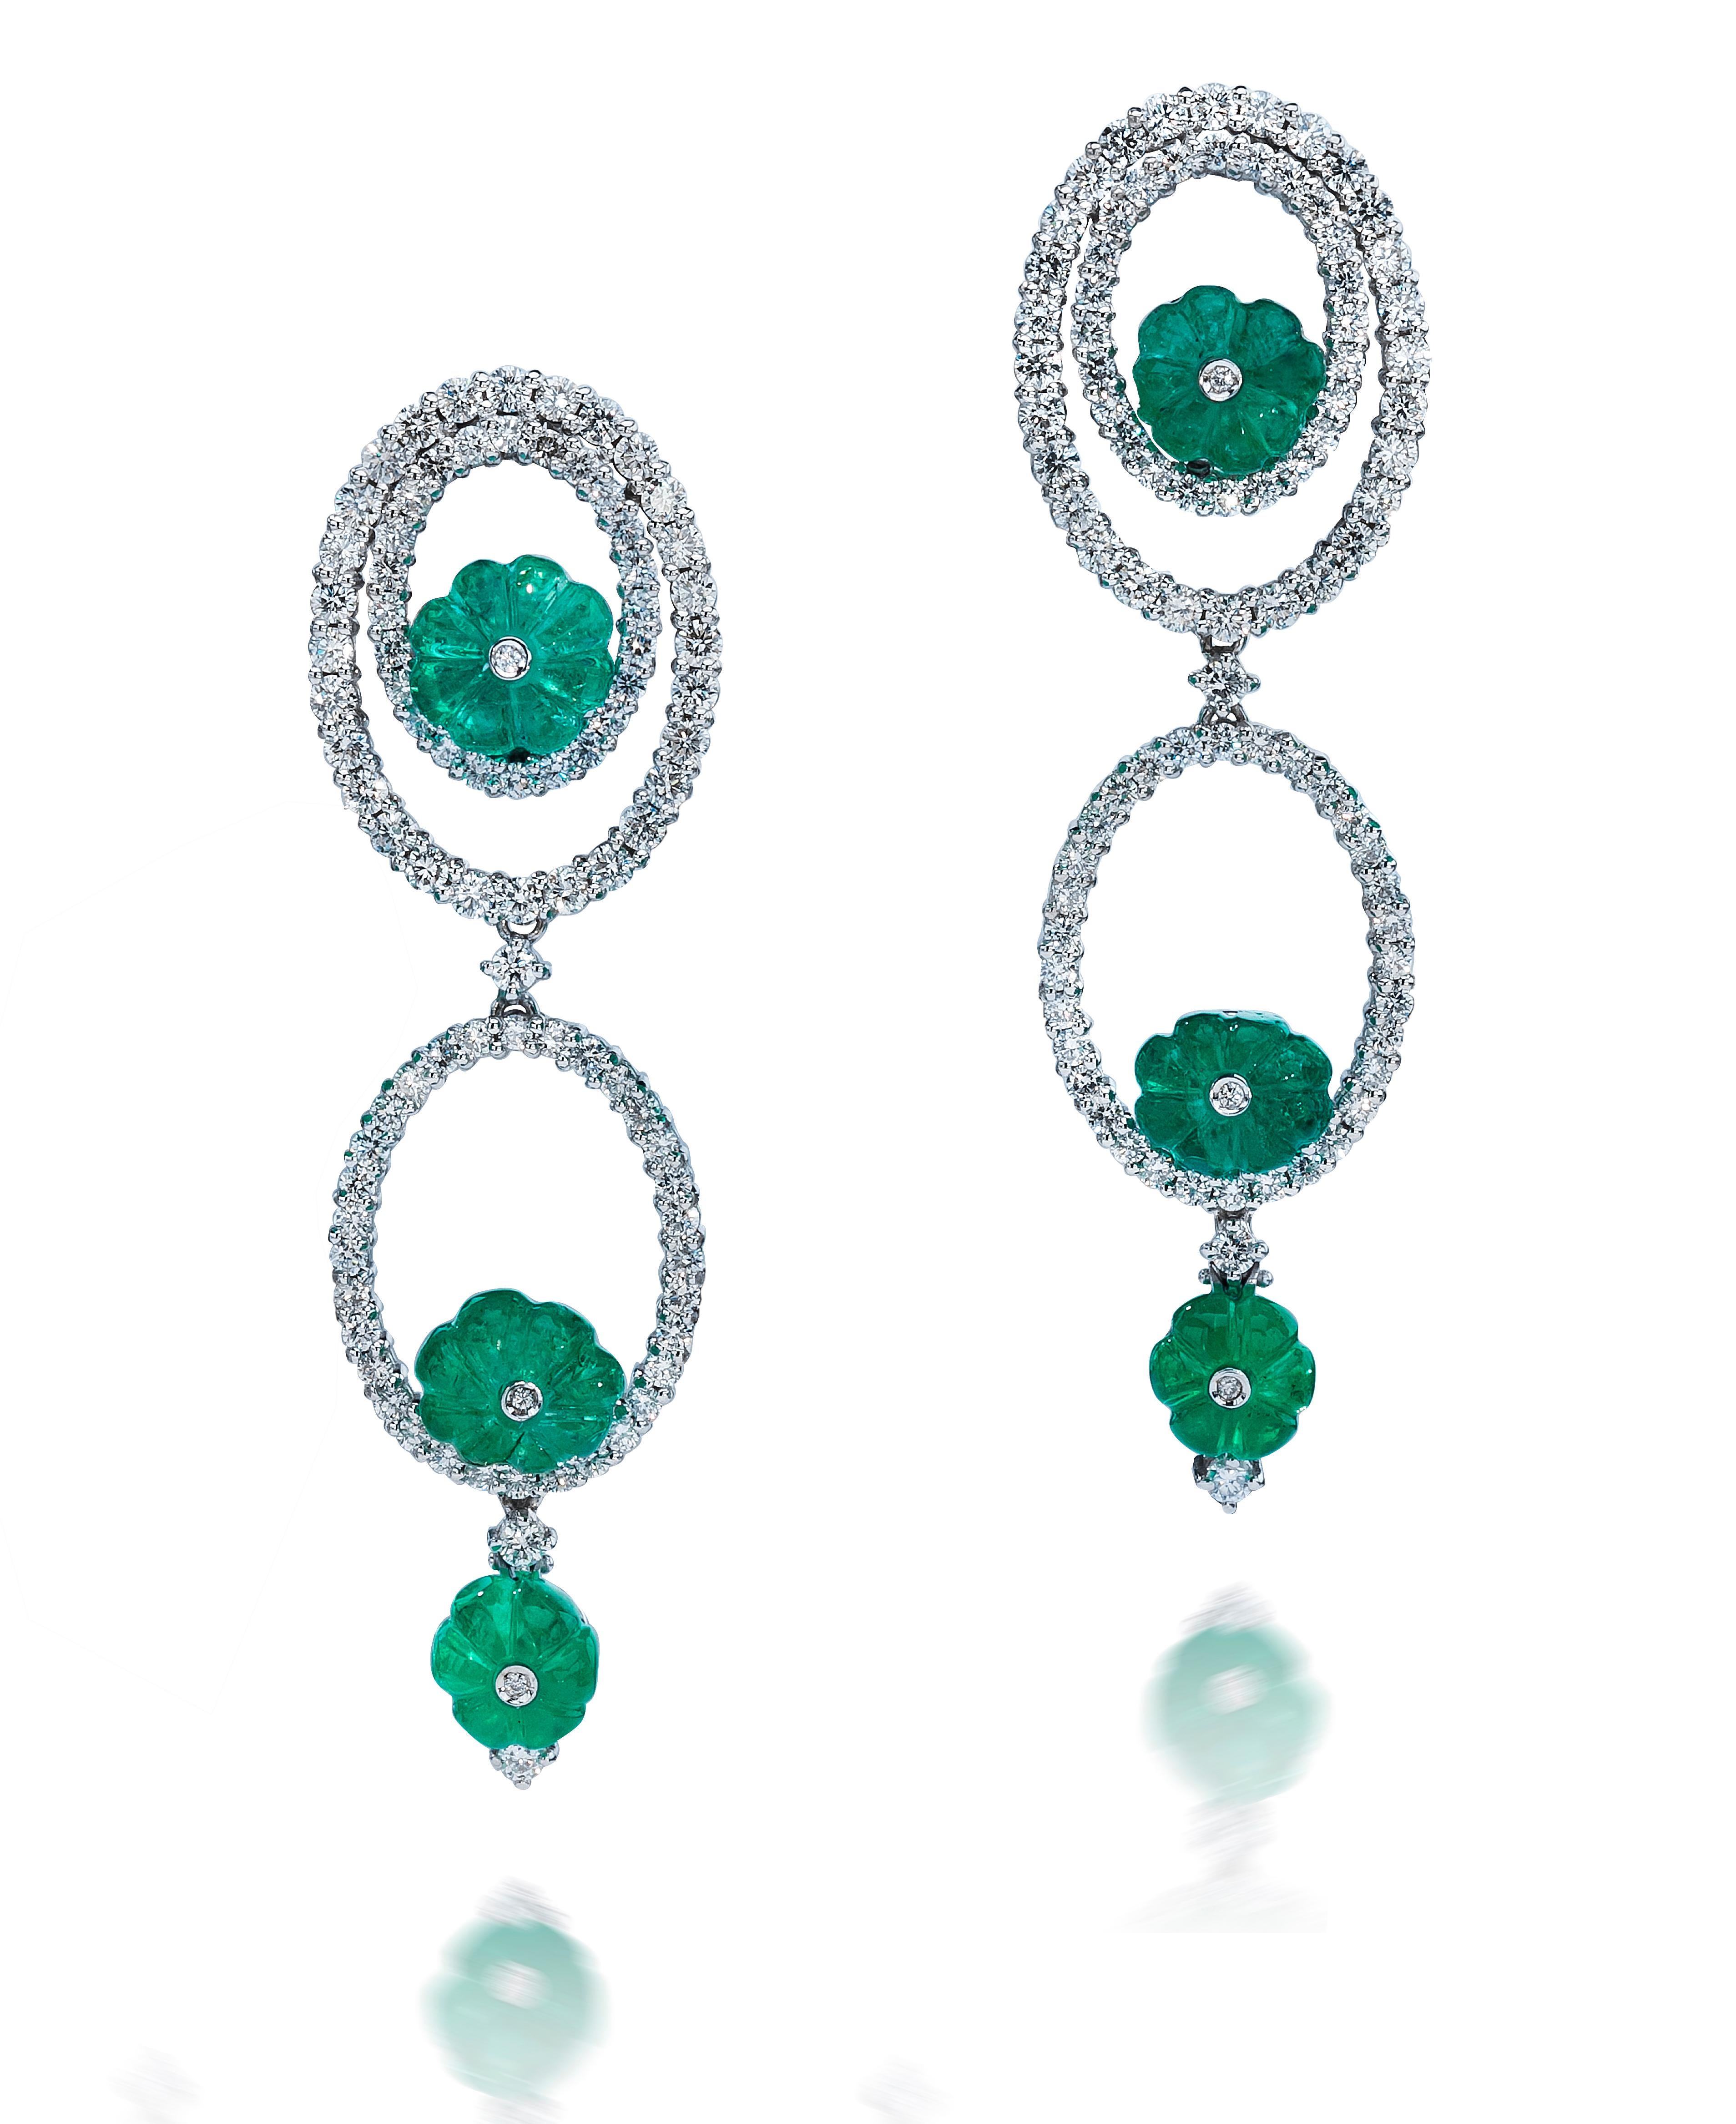 Andreoli Carved Emerald Diamond 18 Karat White Gold Earrings

These earrings feature:
- 5.59 Carat Diamond
- 18.06 Carat Carved Emerald
- 21.16 Gram 18K White Gold
- Made In Italy